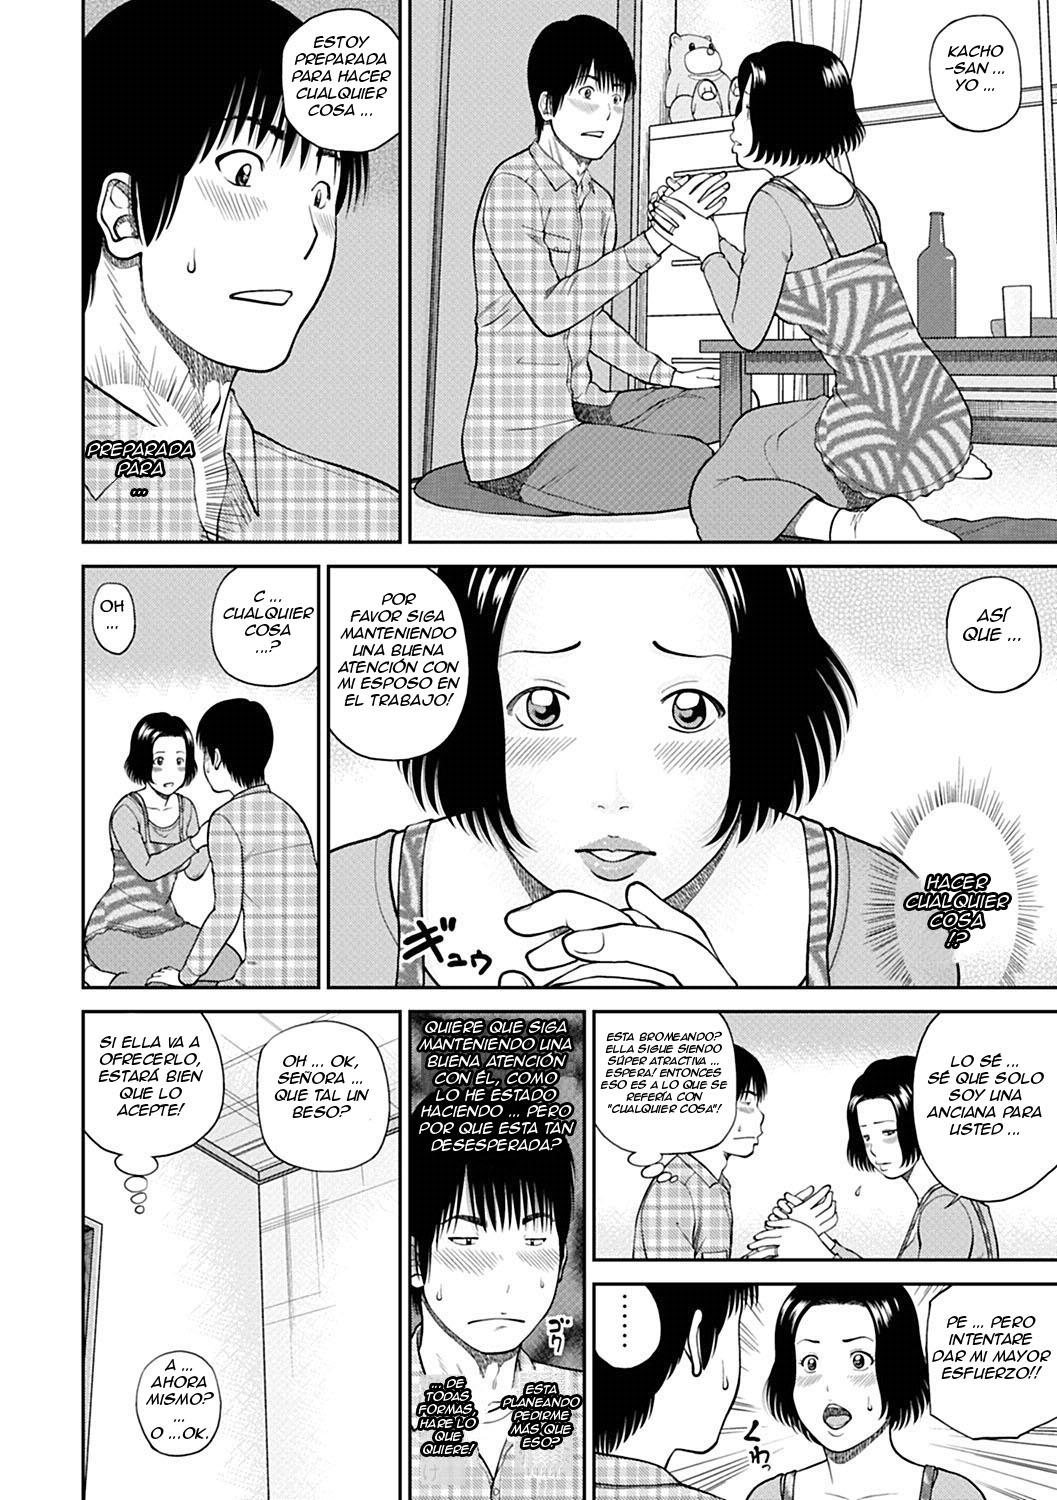 34 Year Old Begging Wife Ch. 1-5 (Sin Censura) Chapter-3 - 5